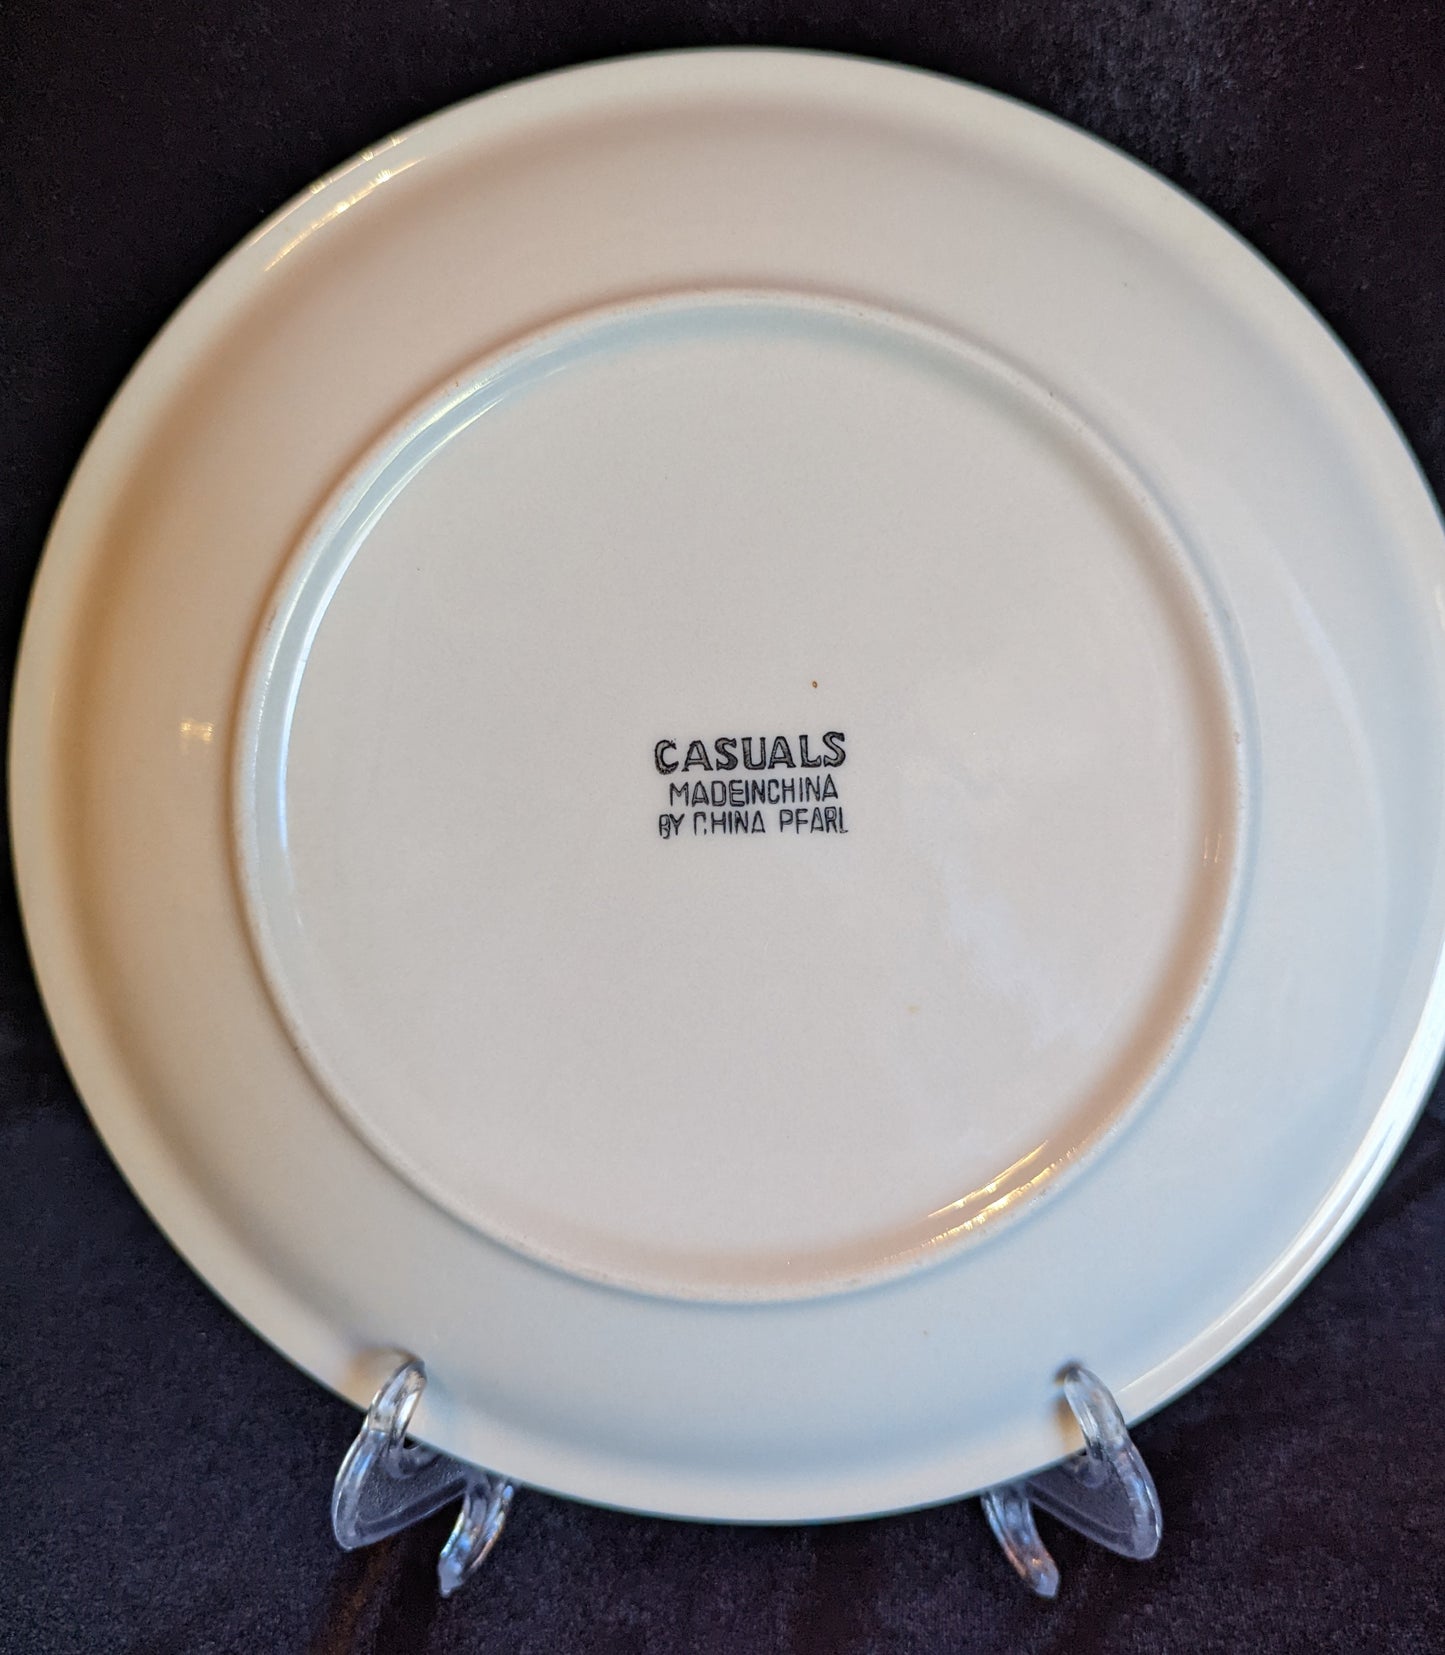 Casuals by China Pearl Vintage Replacement Plate